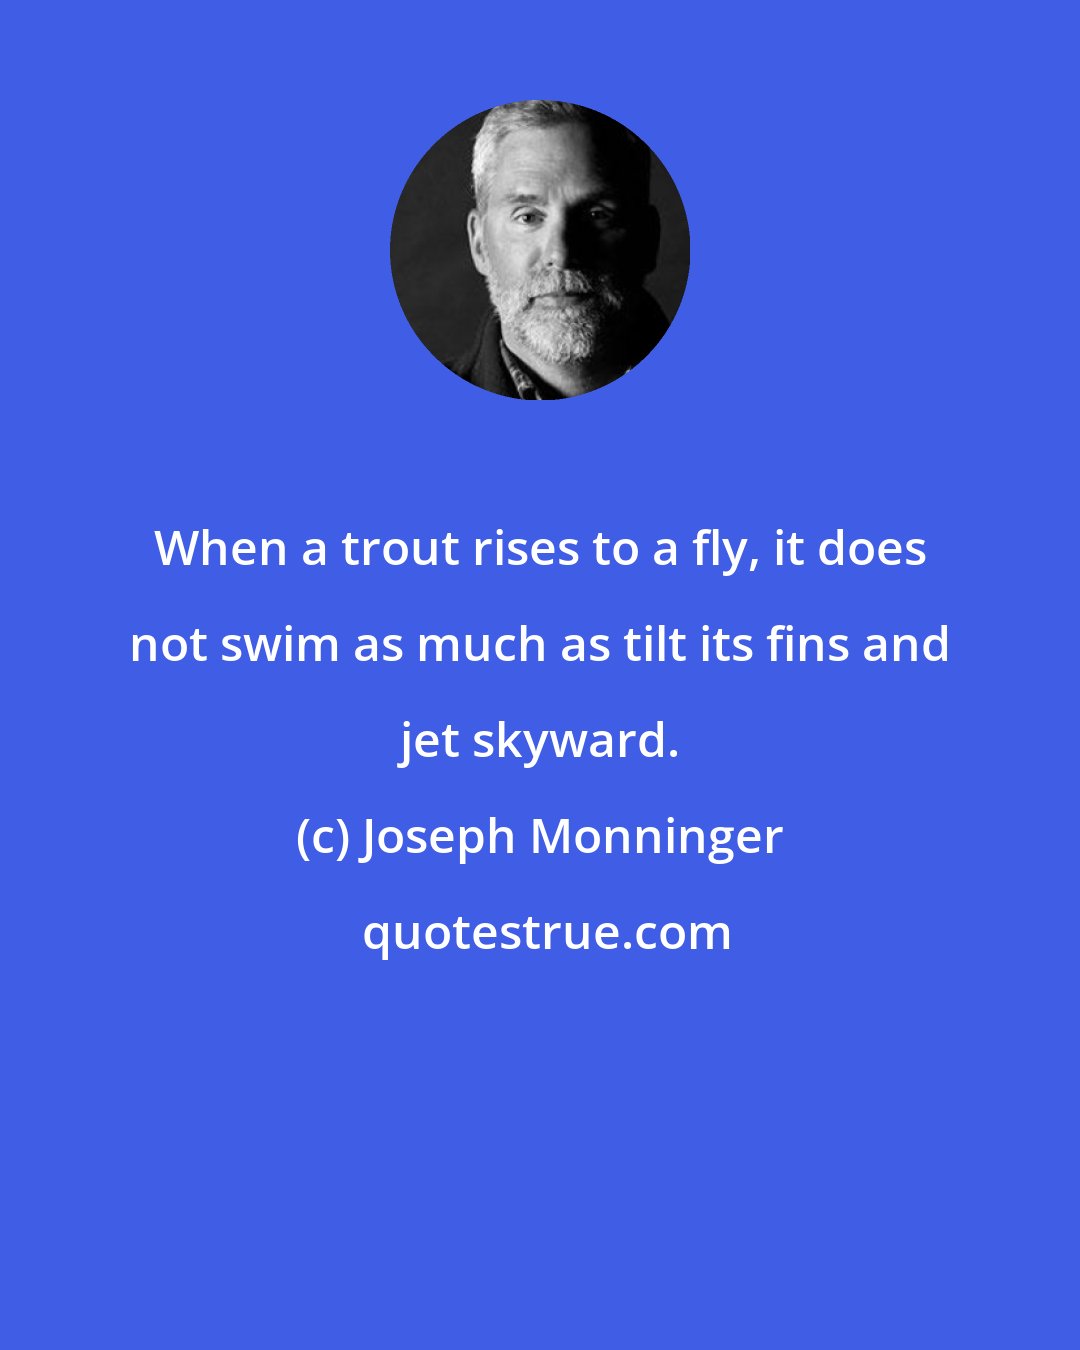 Joseph Monninger: When a trout rises to a fly, it does not swim as much as tilt its fins and jet skyward.